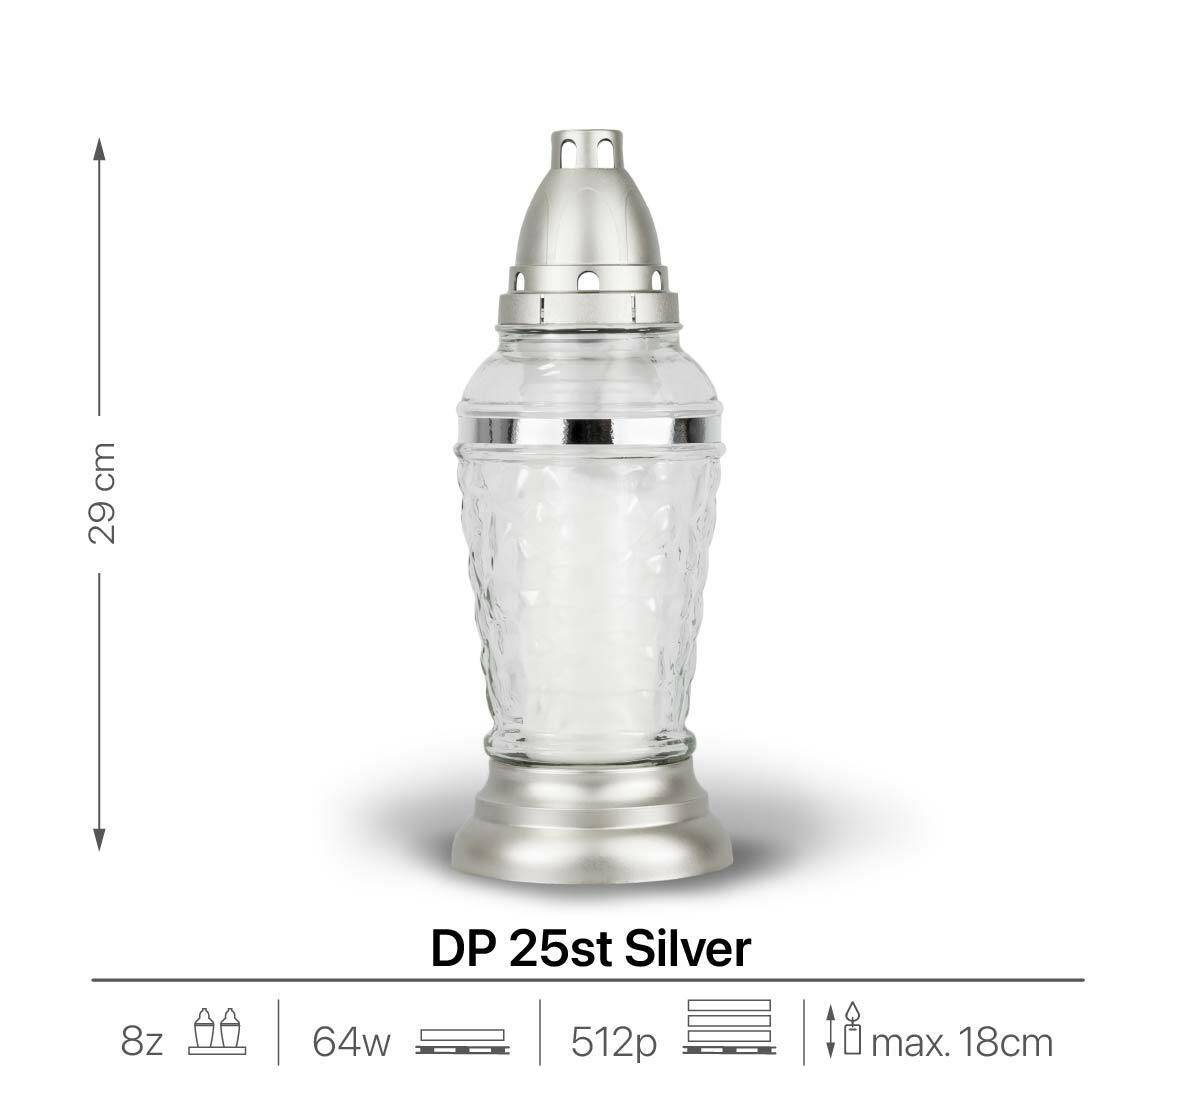 DP 25st Silver